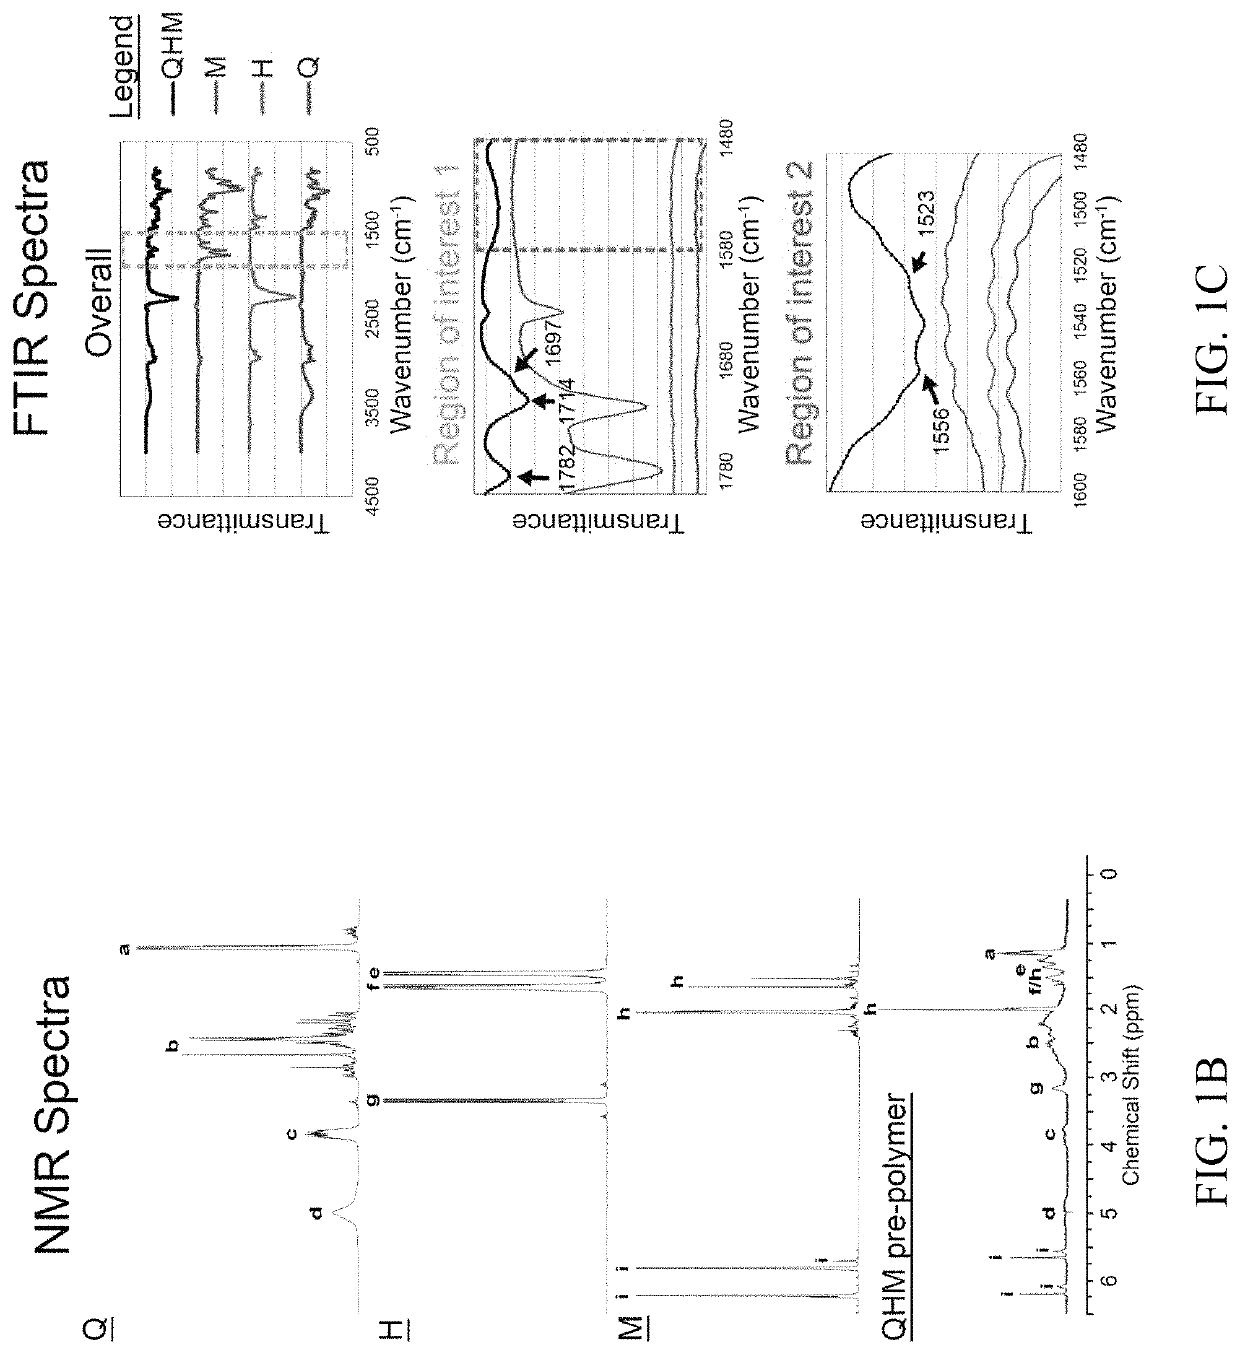 Bone-tendon graft biomaterial, use as a medical device and method of making same